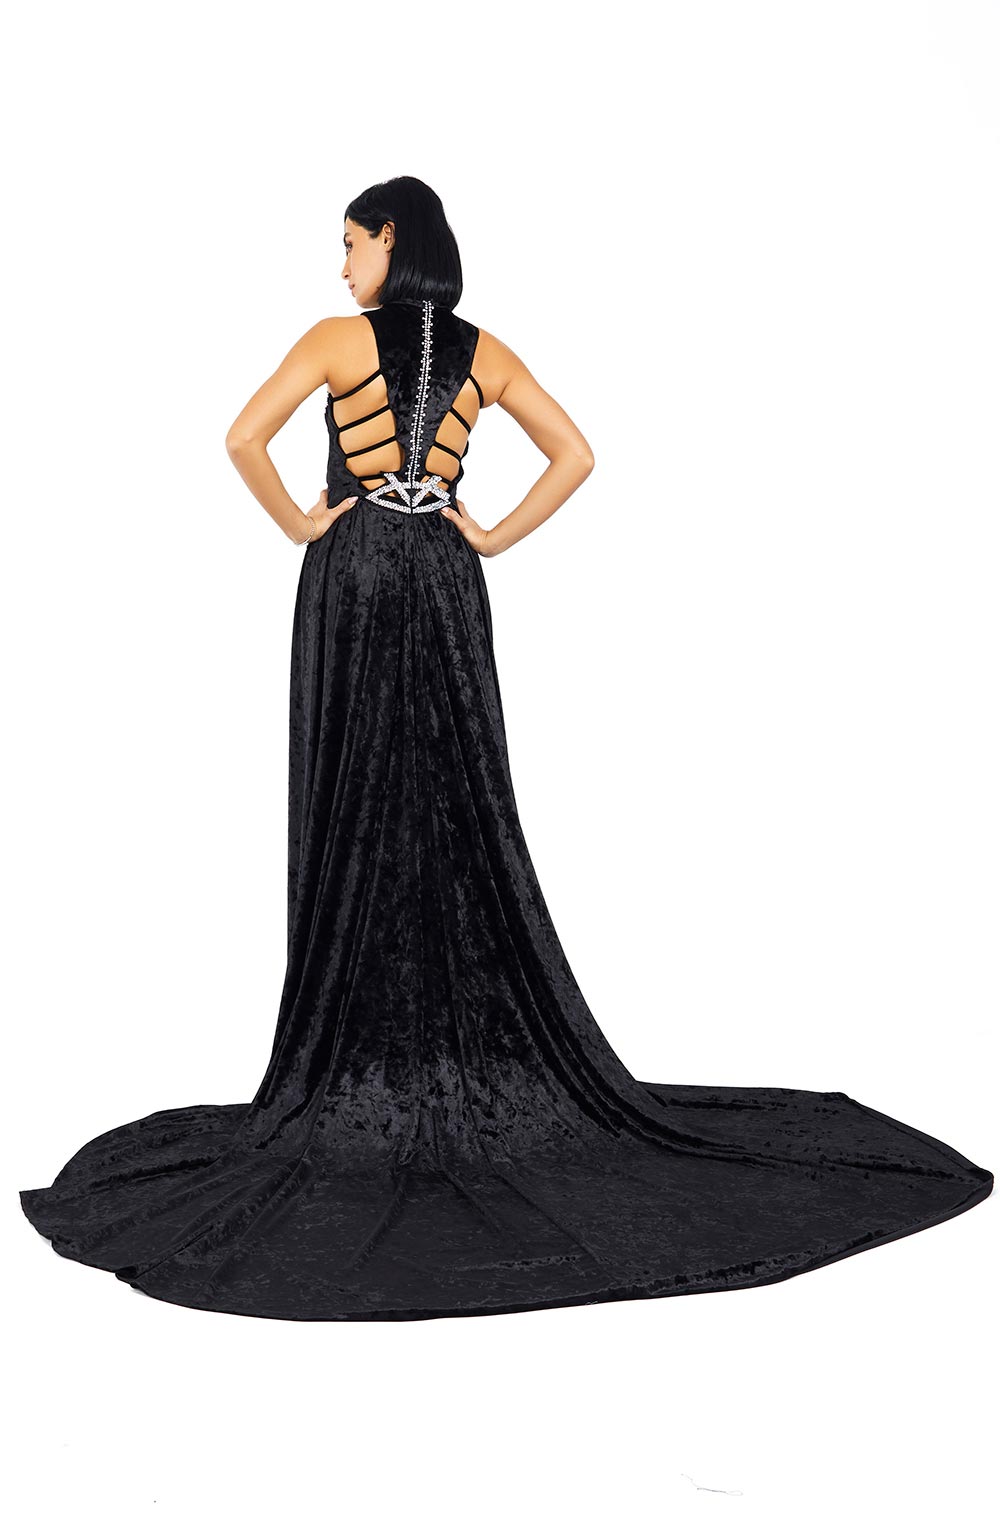 The Siren Eye Maxi Dress by The House of Victor